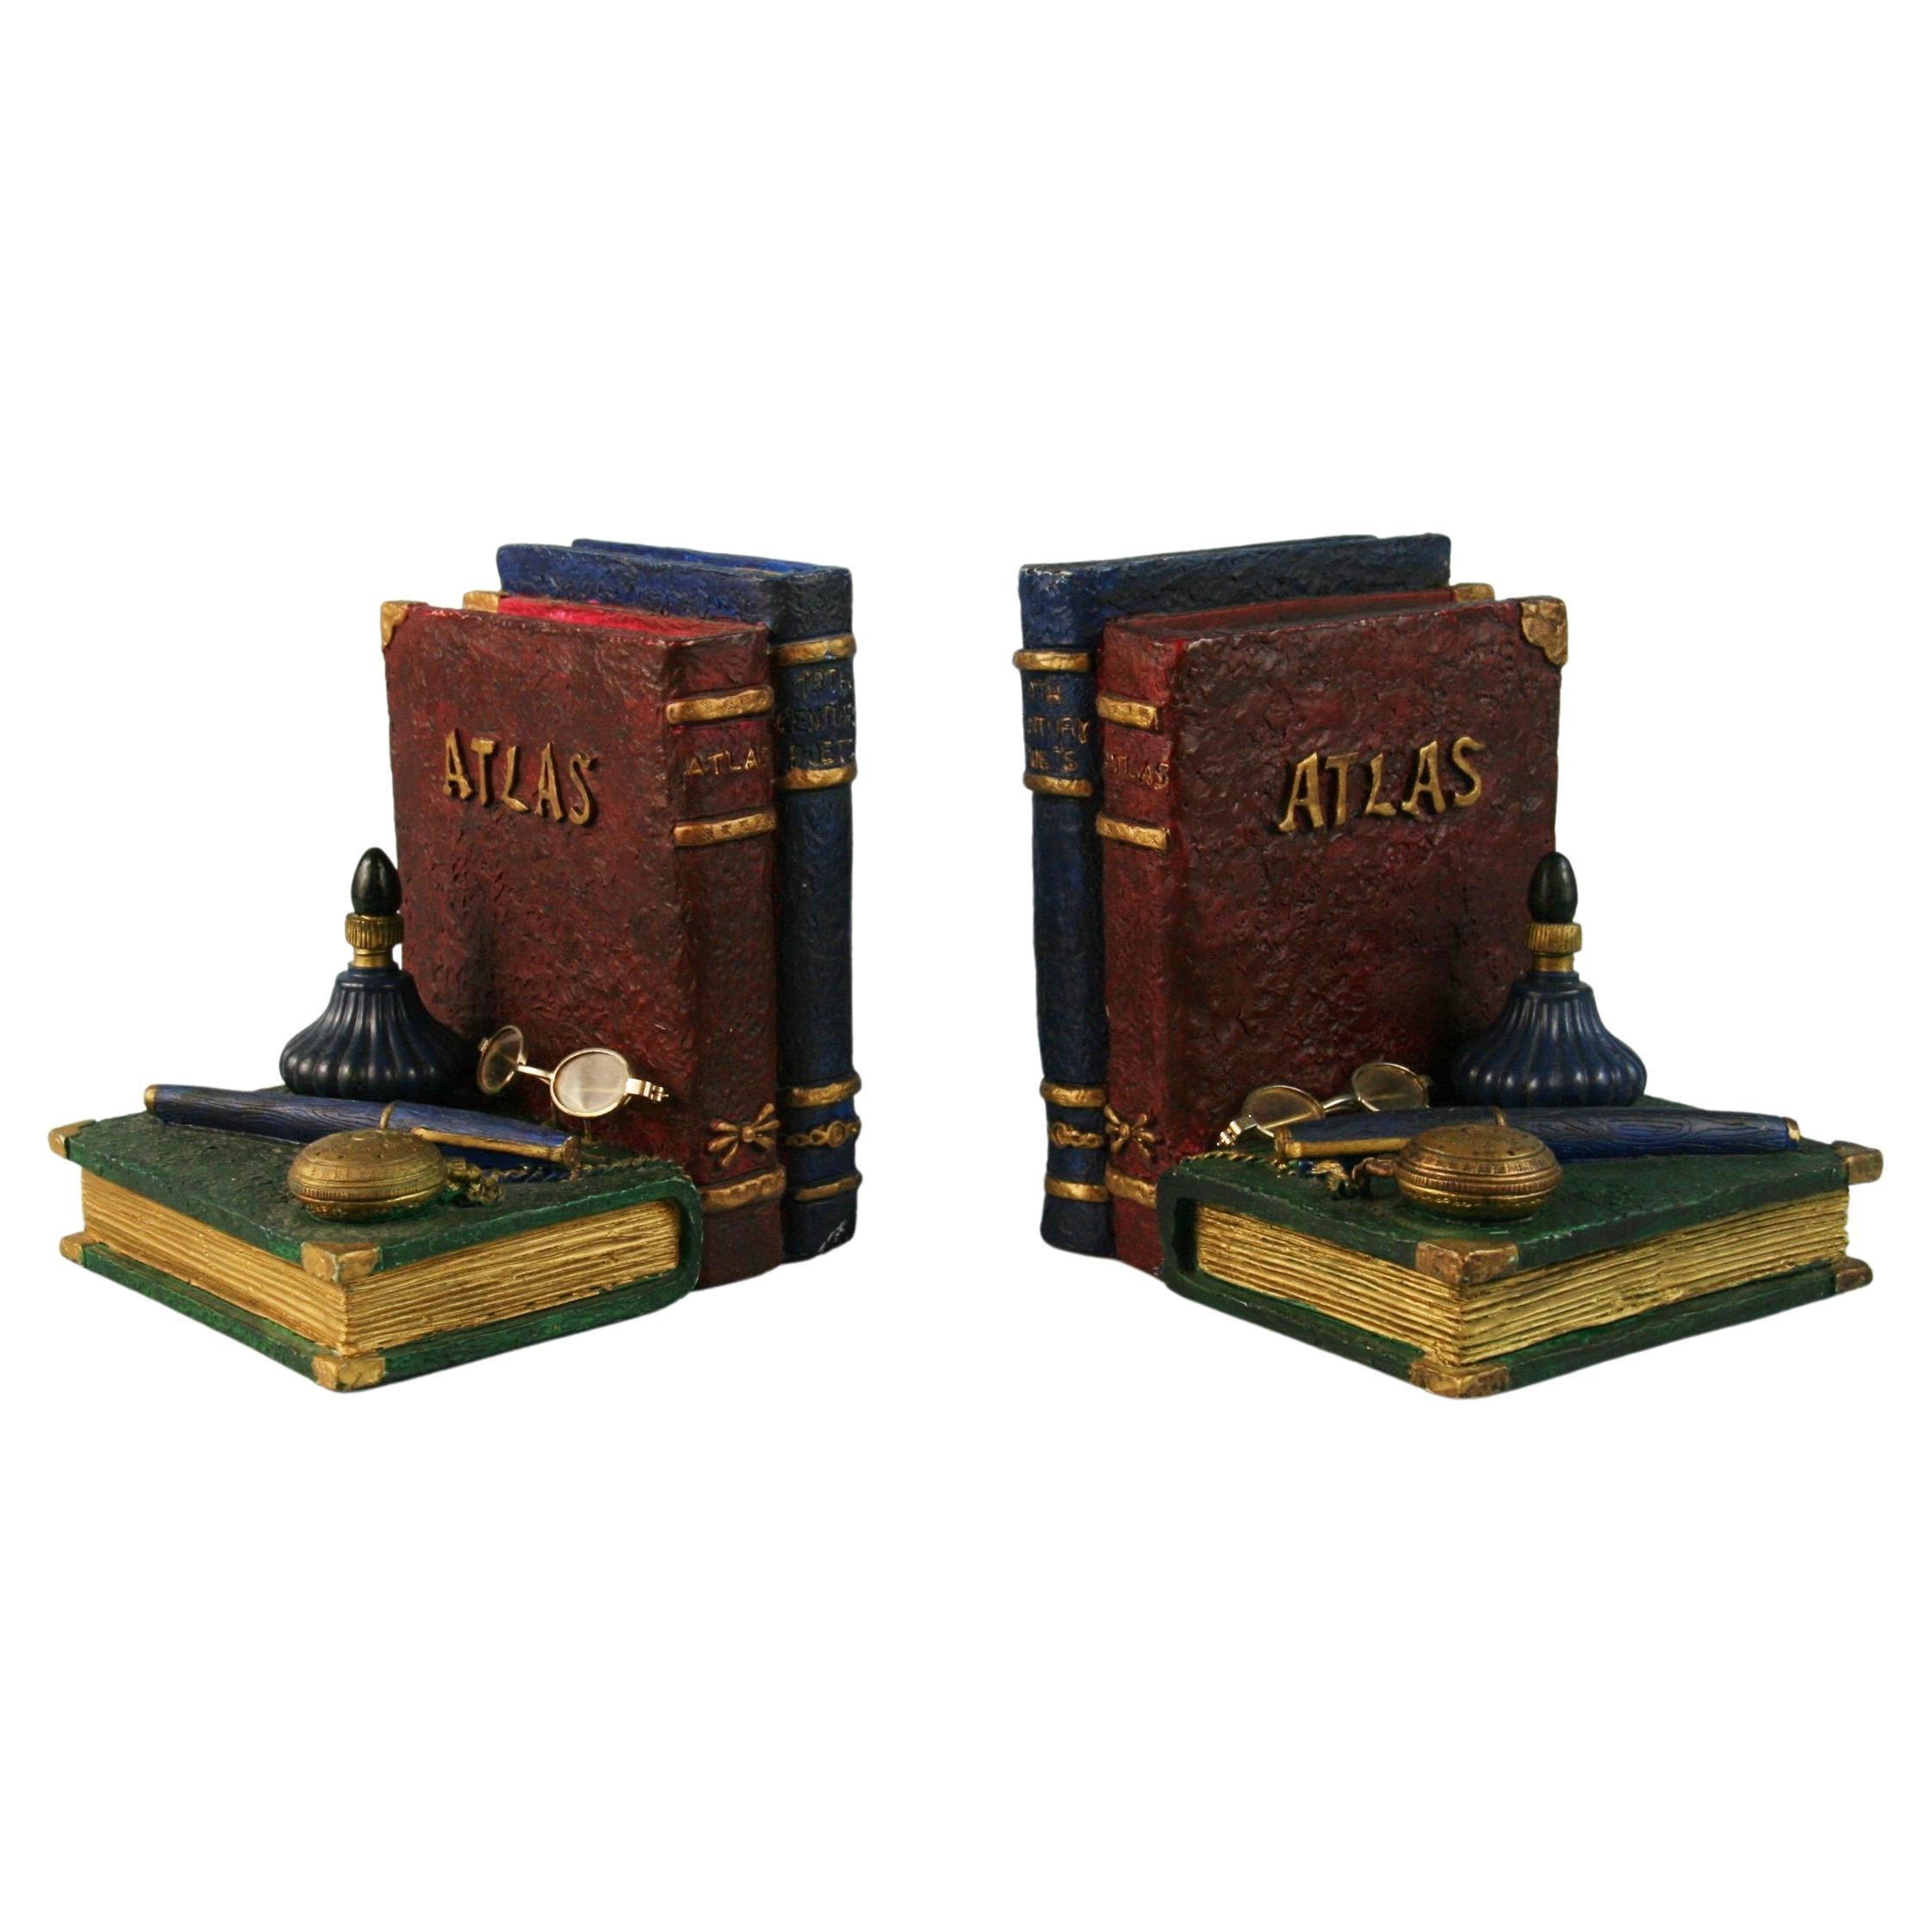 Pair Book and Pen Bookends